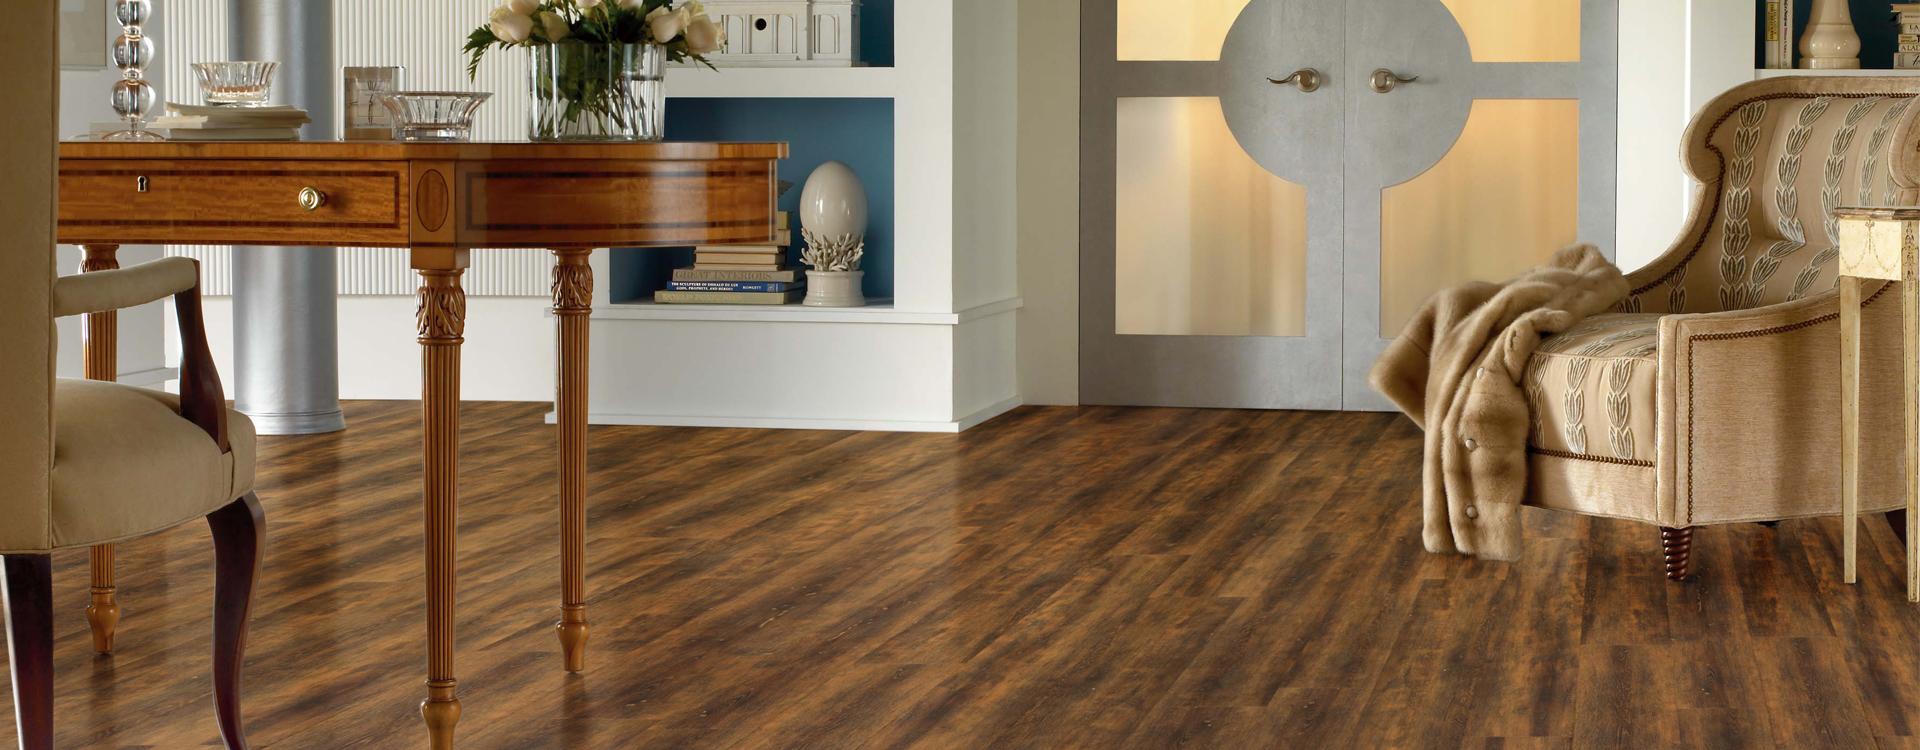 Horizen Flooring presents to you a picture of a quality wide plank Williamsburg luxury vinyl plank. NovoCore Premium EIR collection features a wide range of colors & designs that will compliment any interior. Natural wood grain synchronized surface allow for an authentic hardwood look & feel. This collection features a 0.25″ / 6.5 mm overall thickness and a durable 22 mil / 0.55 mm wear layer for residential and commercial applications.